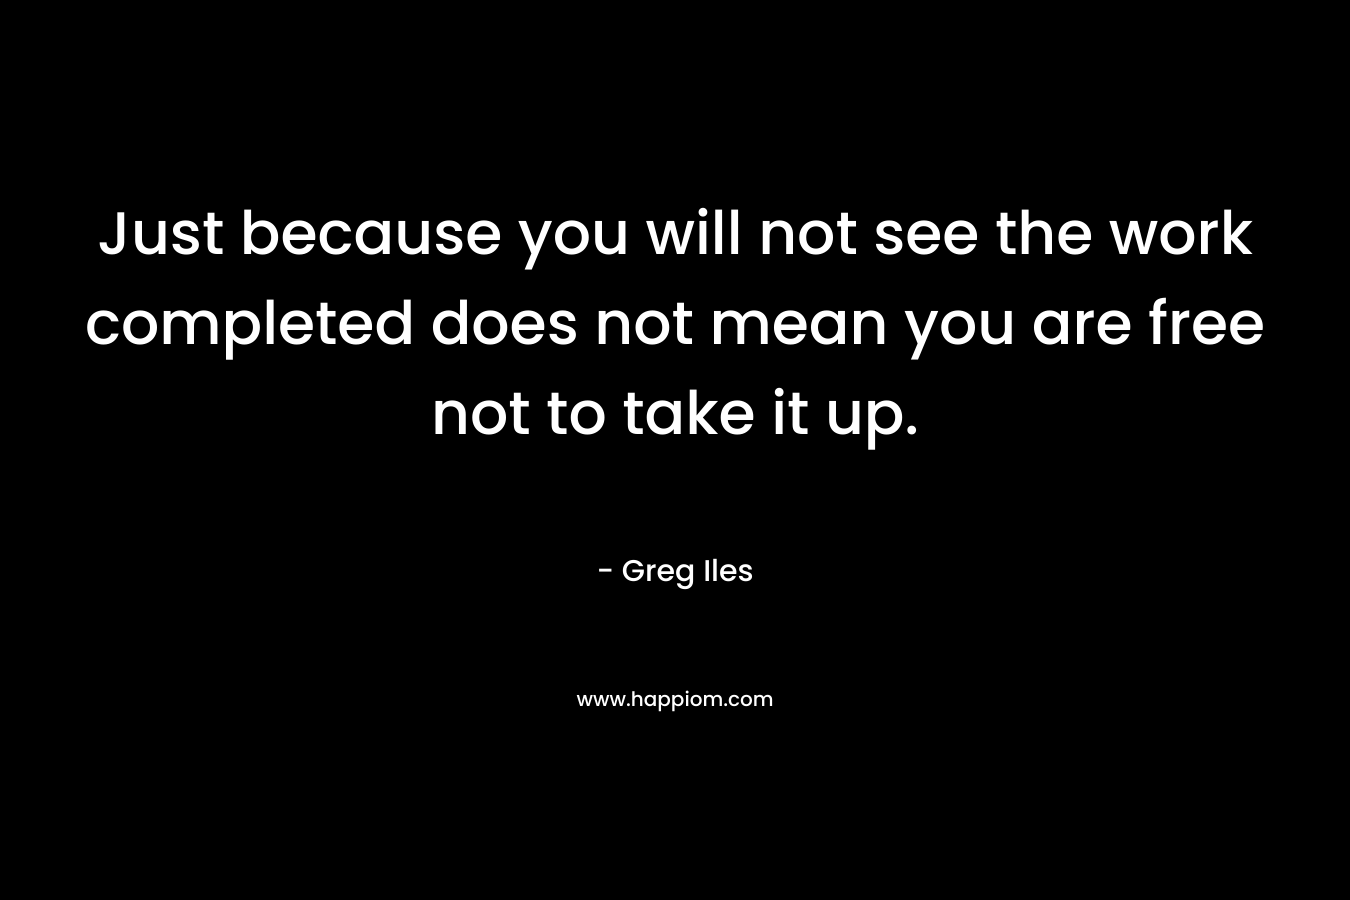 Just because you will not see the work completed does not mean you are free not to take it up. – Greg Iles